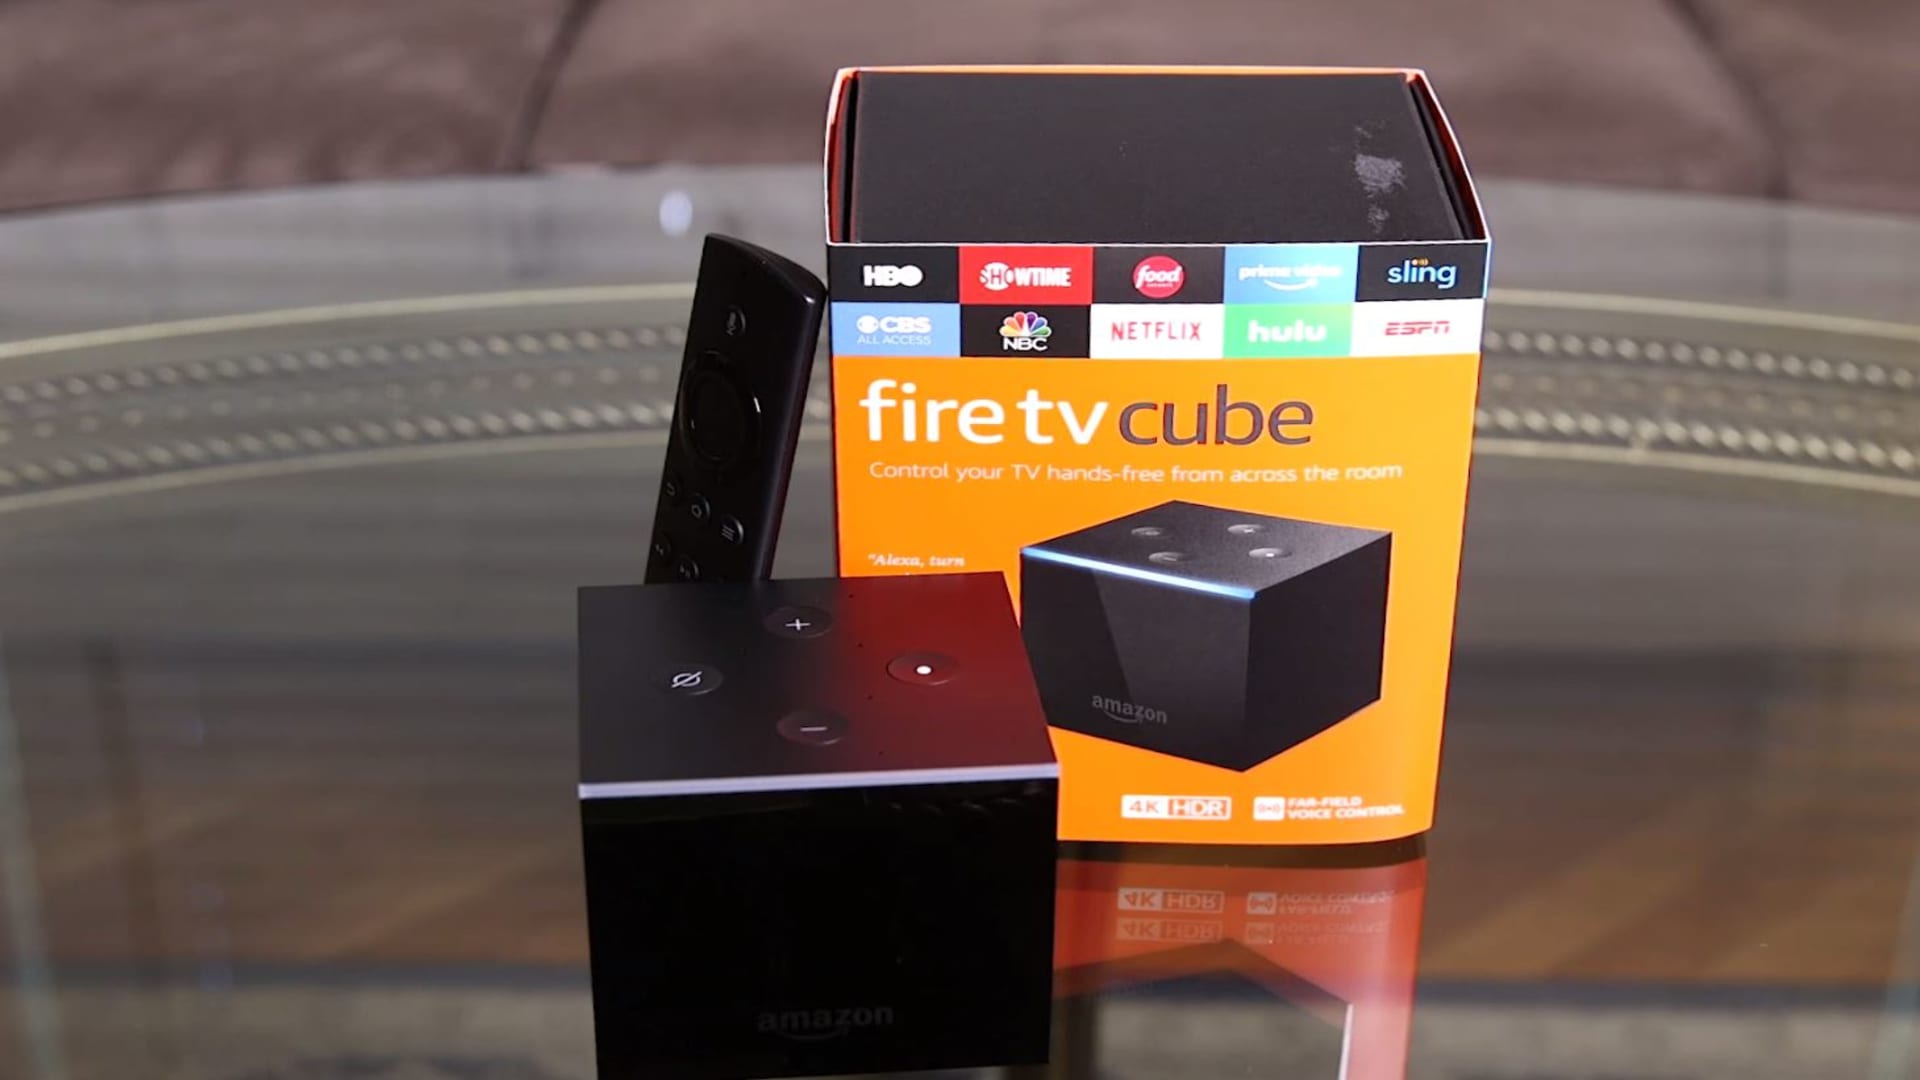 The Amazon Fire TV Cube is so good I want one for every TV in my house